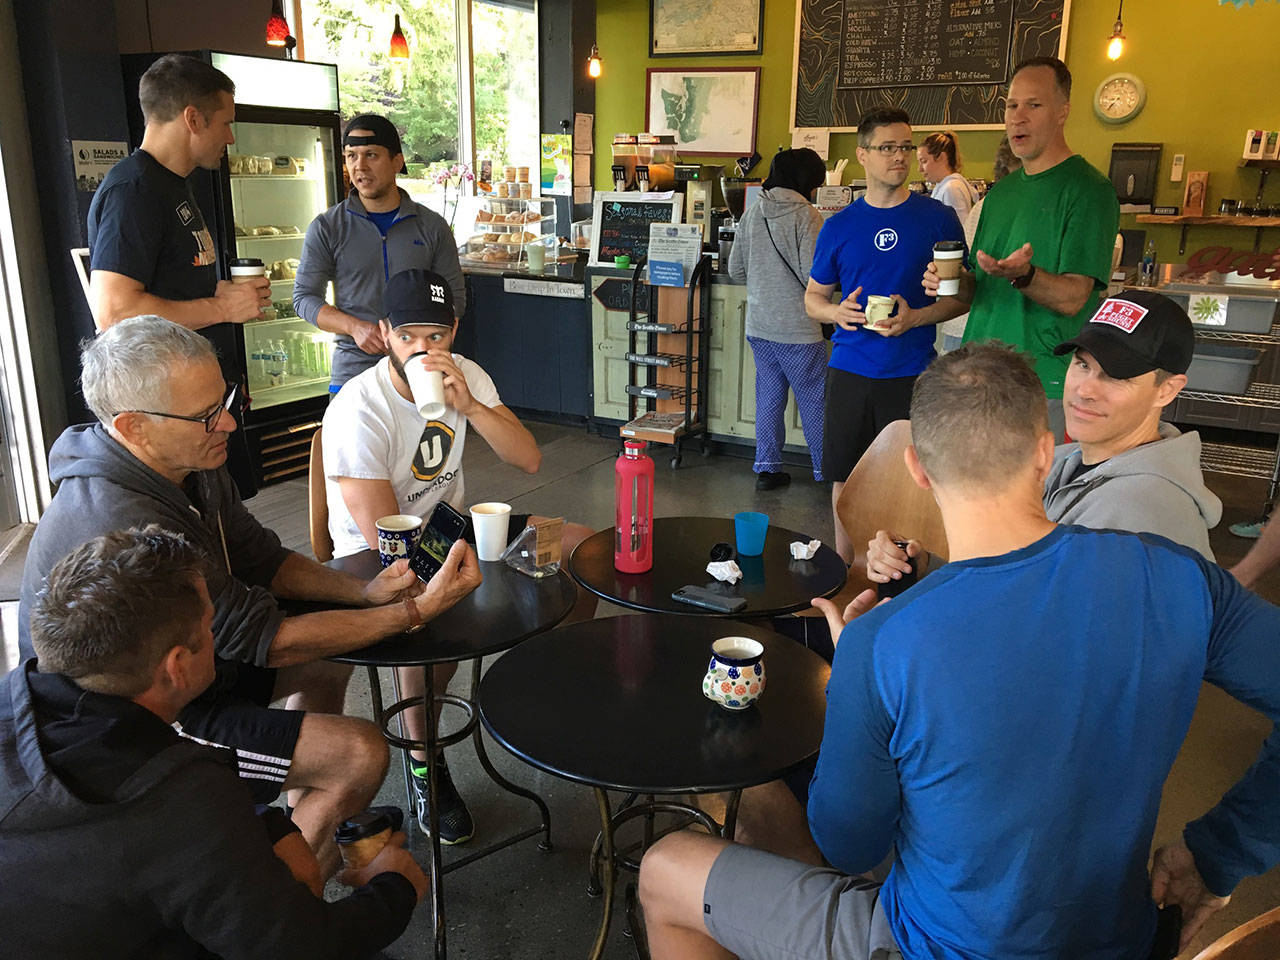 F3 members often meet for coffee after workouts as part of the community-building aspect of the group. Photo Courtesy of Brian “Dilfer” Gawthrop